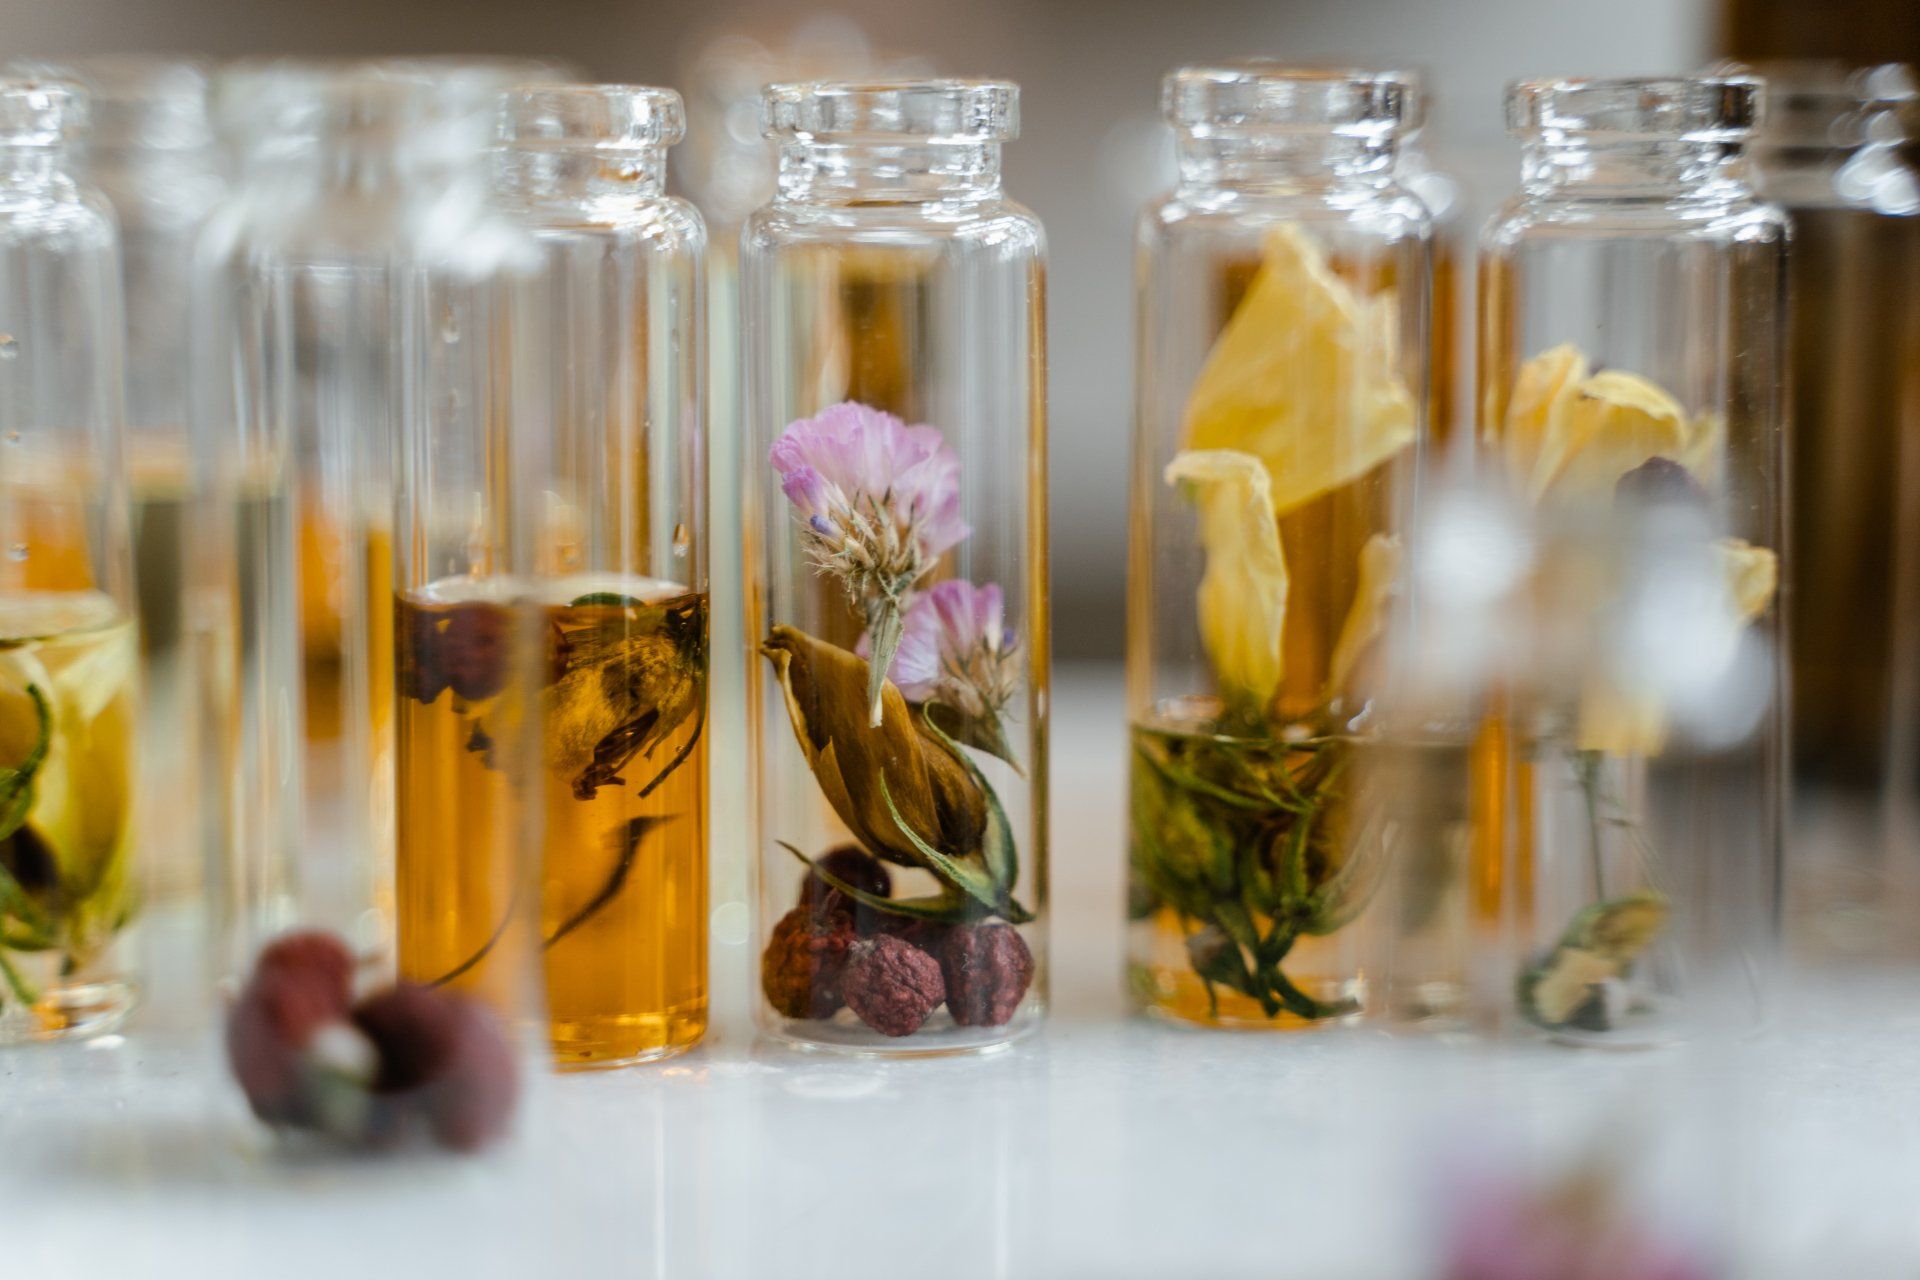 A row of bottles filled with different types of liquid and flowers.